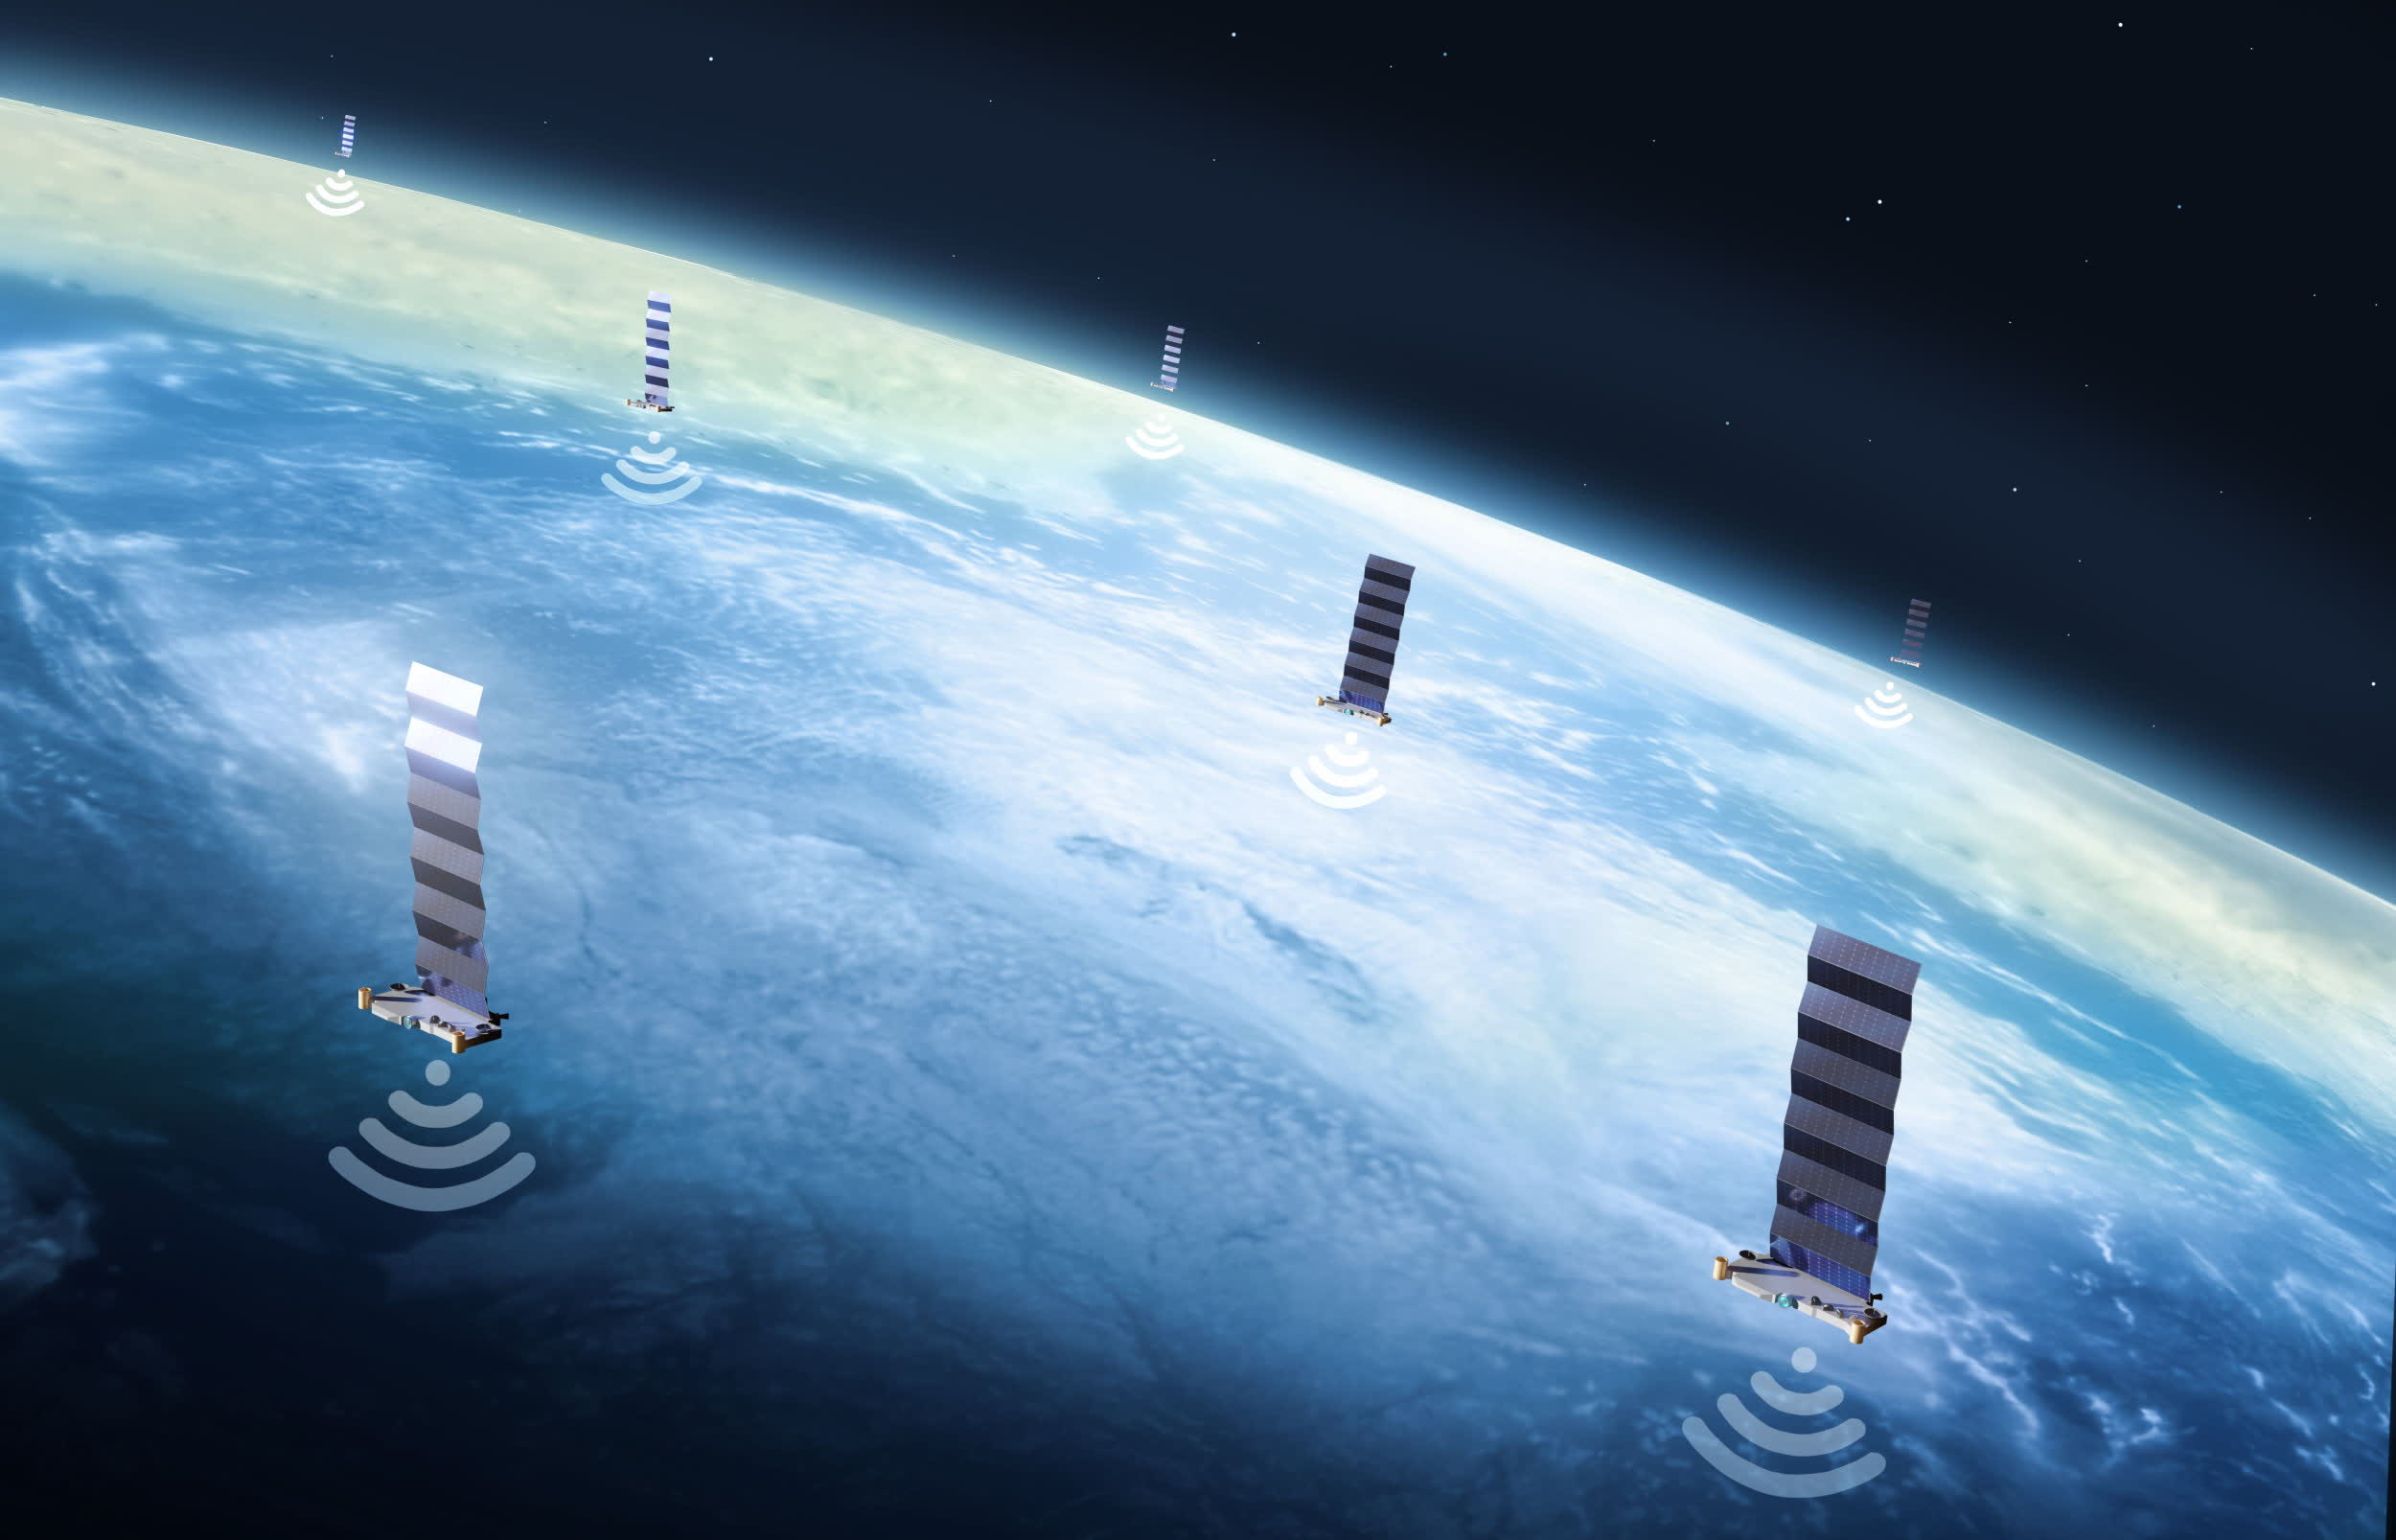 European companies form a coalition to build the new IRIS² satellite comm network